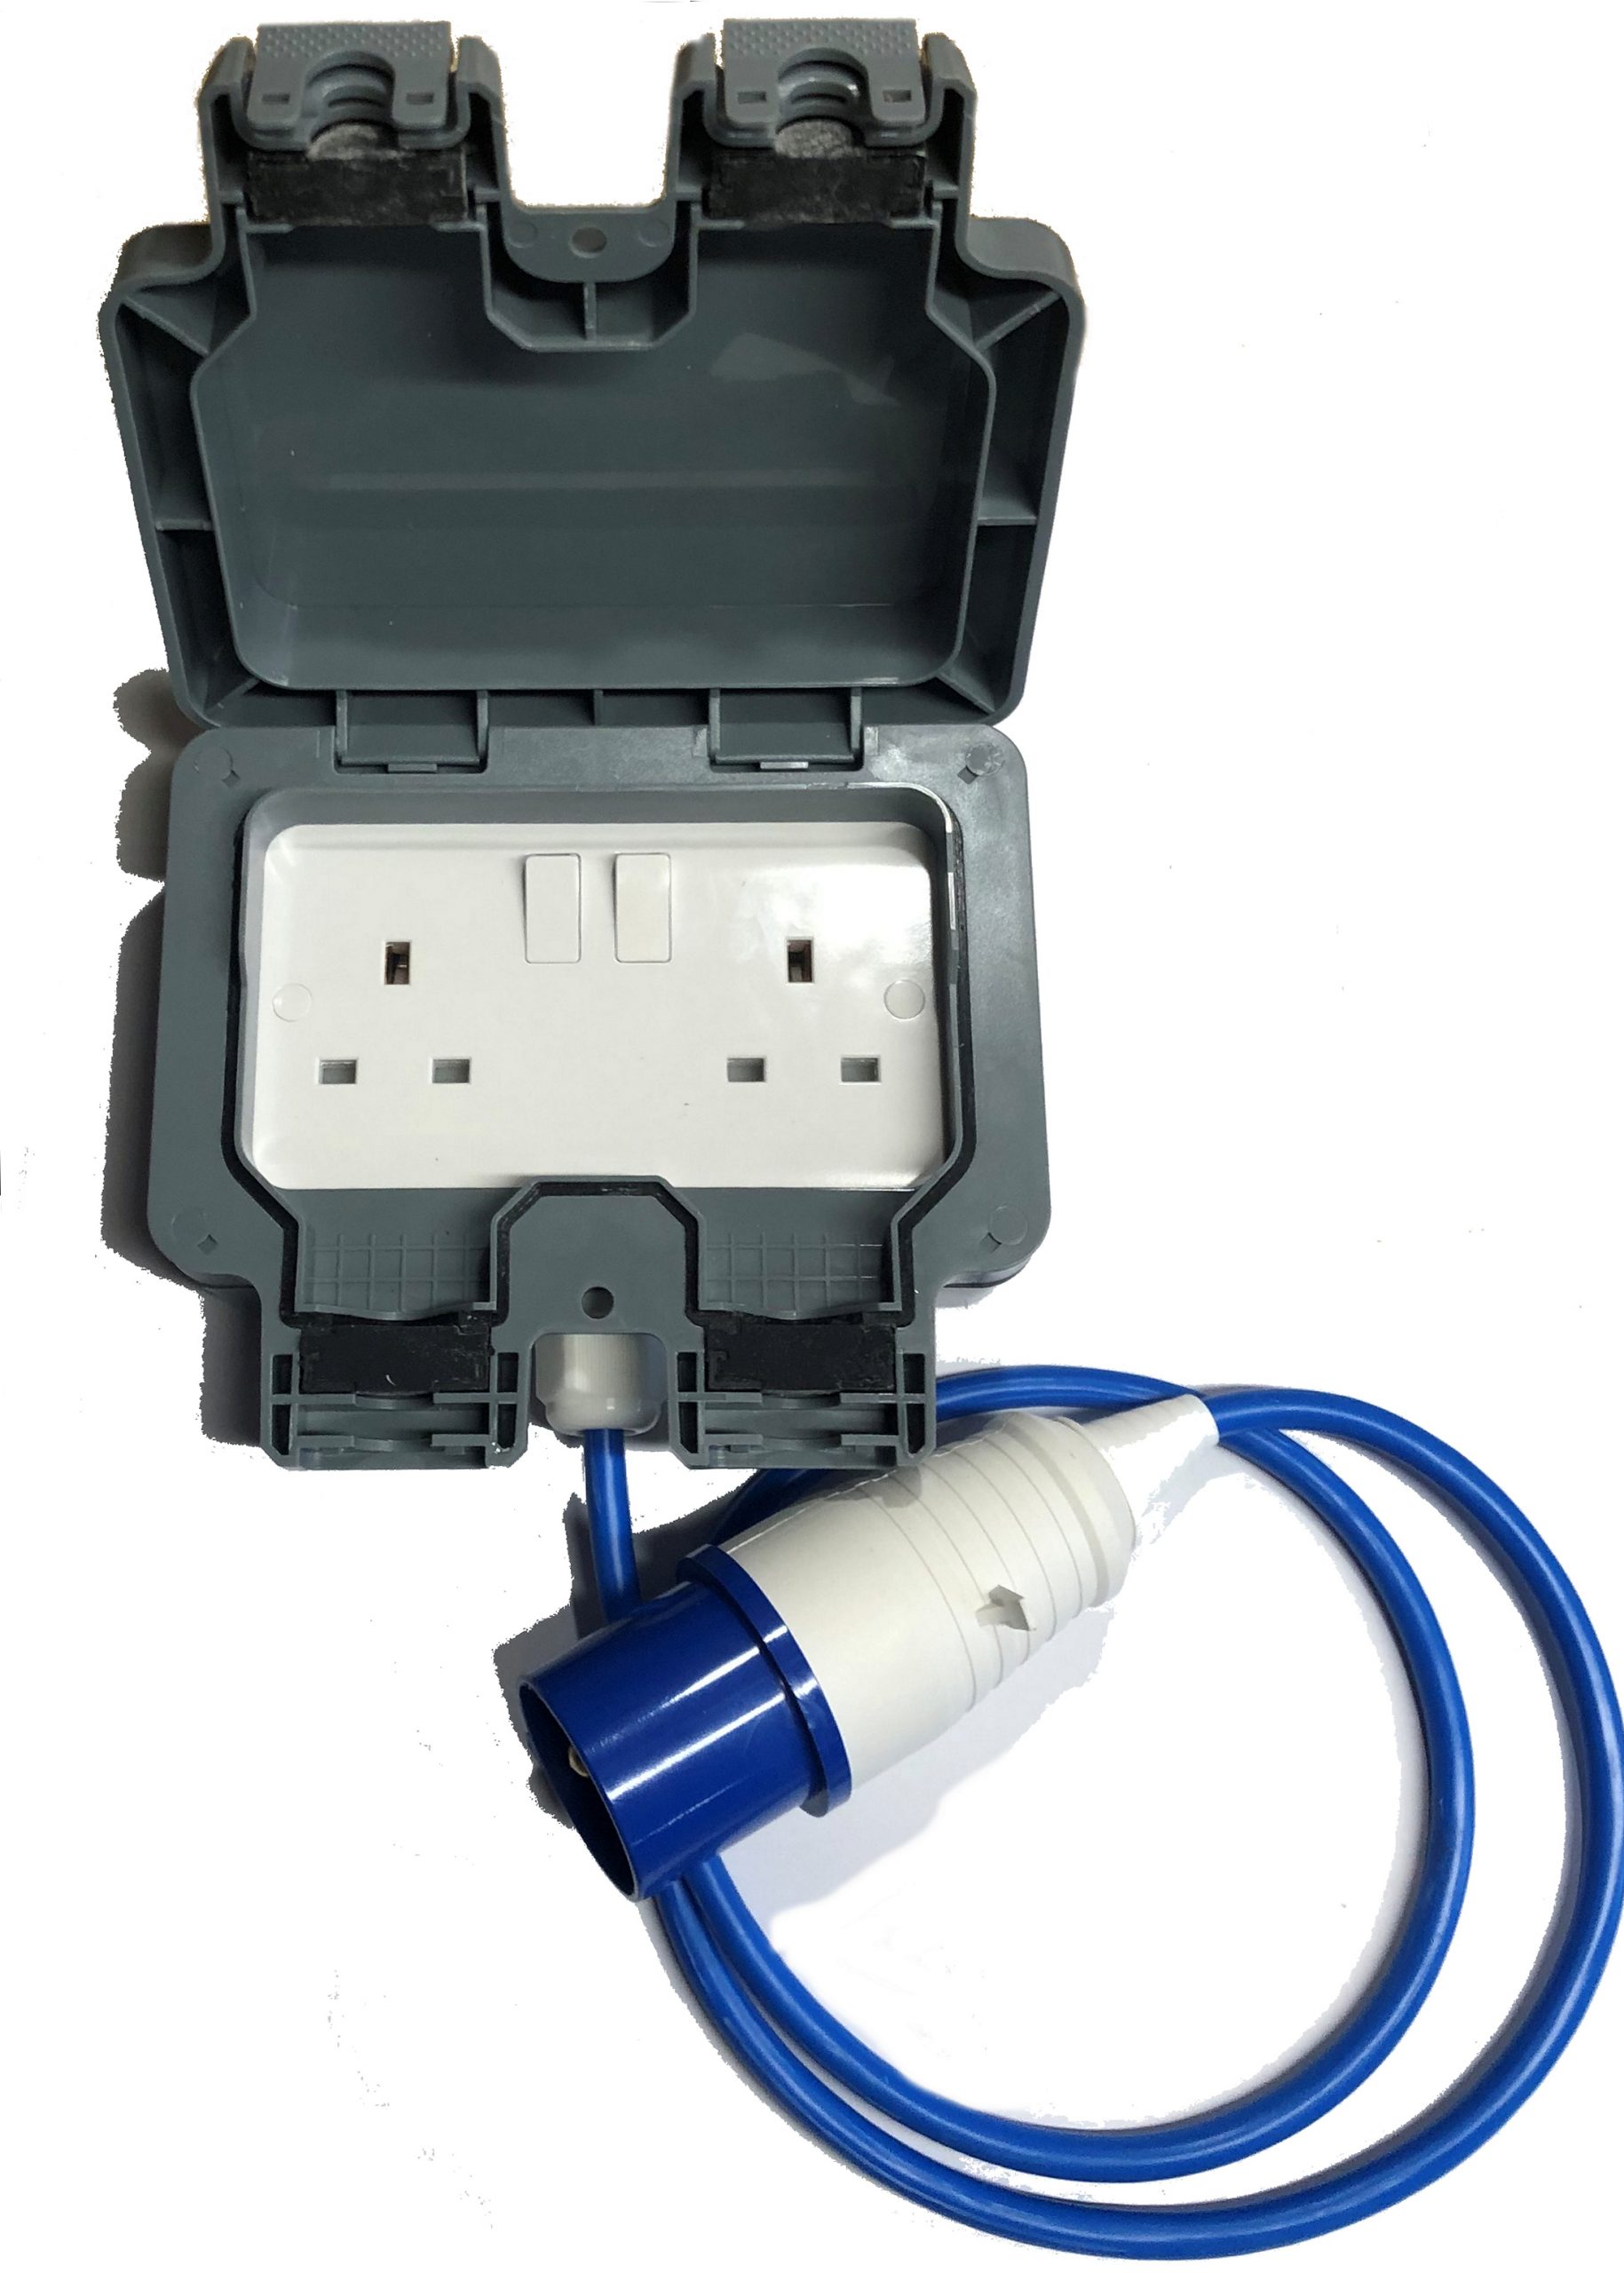 Camping/Caravan outdoor garden extension lead socket box IP66 Rated with 16amp Plug